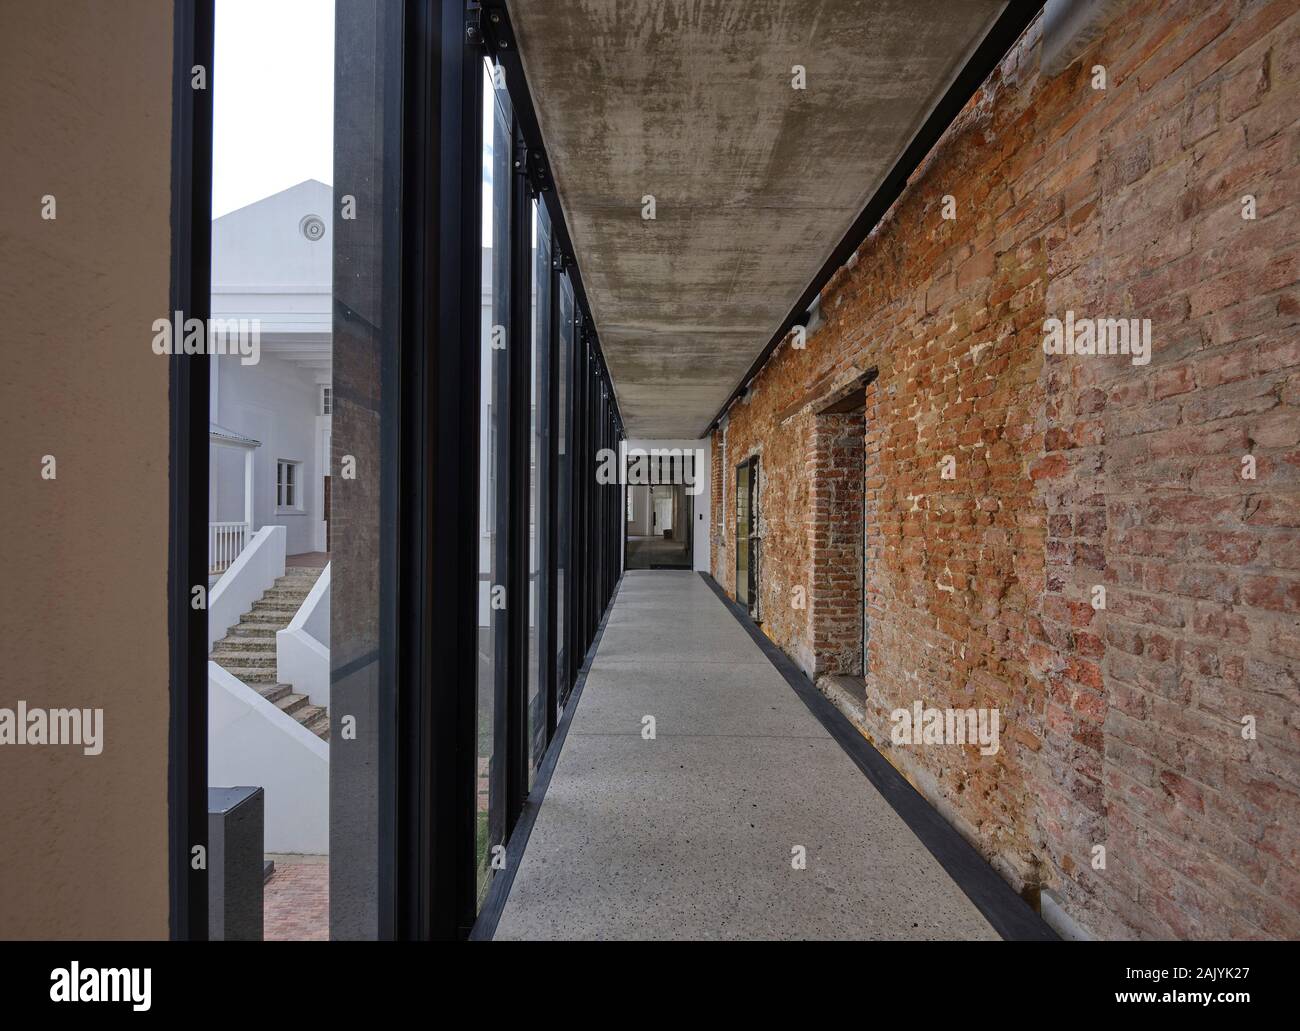 Corridor with exposed brick wall. Desmond & Leah Tutu Legacy Foundation, Cape Town, South Africa. Architect: Makeka Design Lab, 2019. Stock Photo